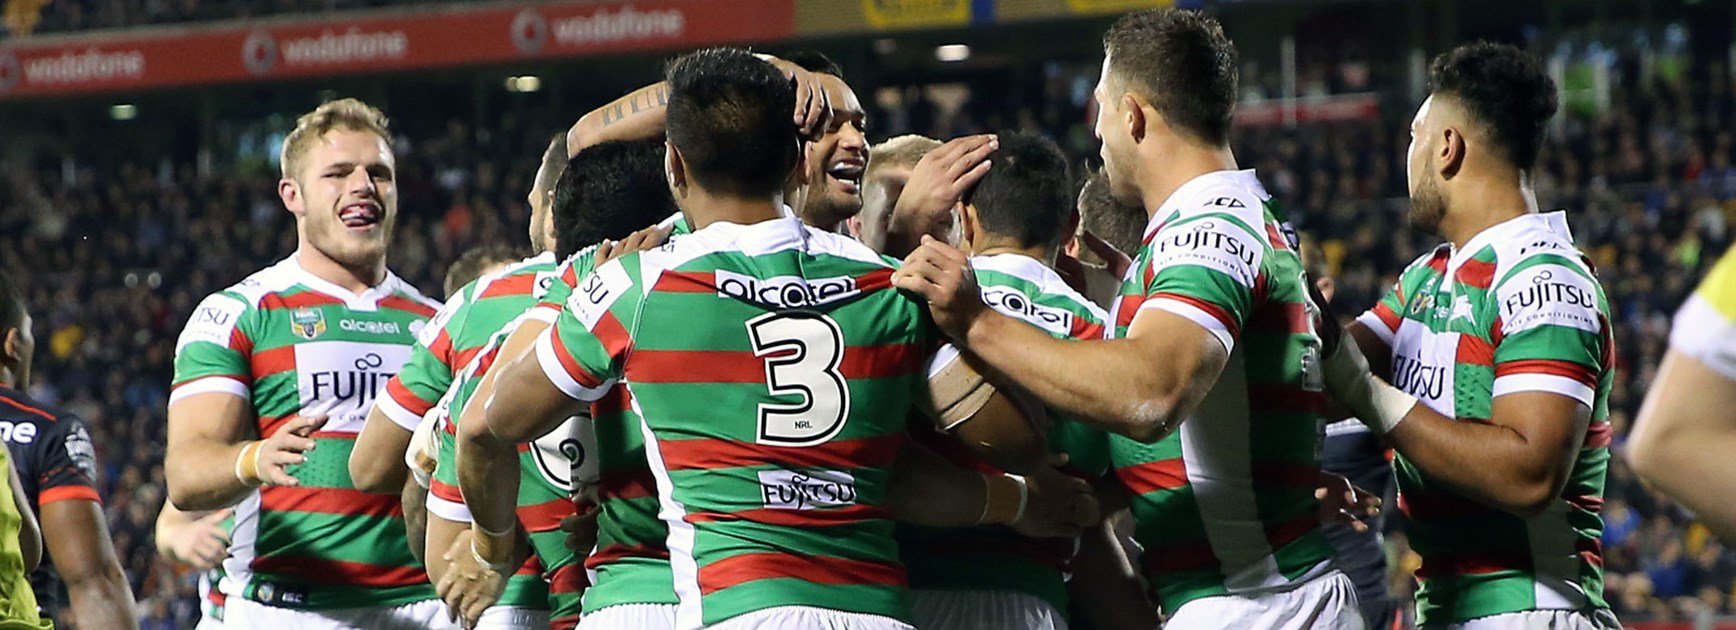 Rabbitohs players celebrate against the Warriors in Round 23.